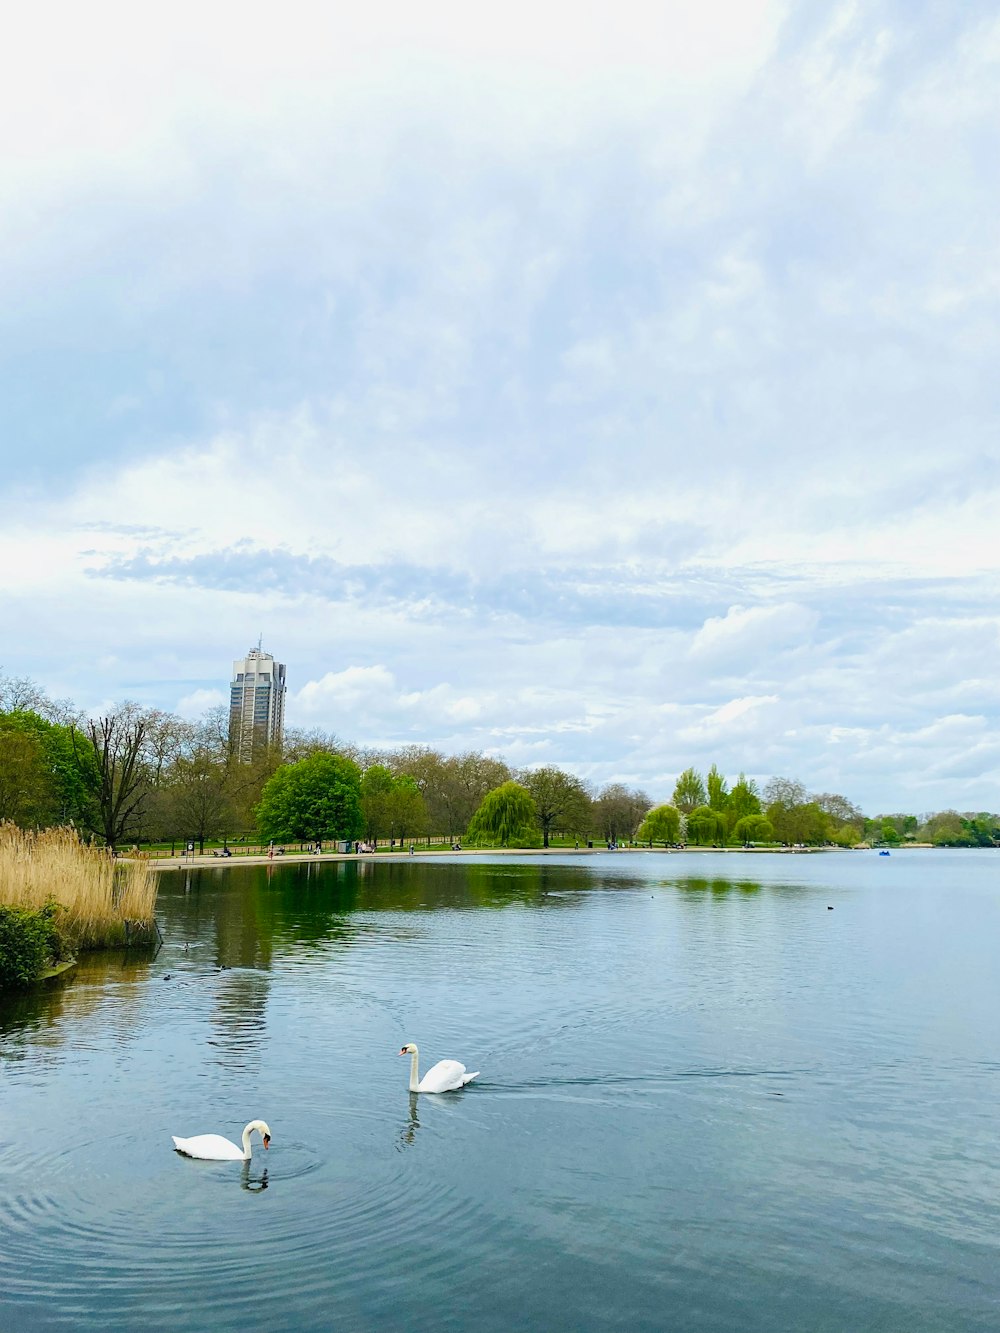 two swans swimming in a lake with tall buildings in the background